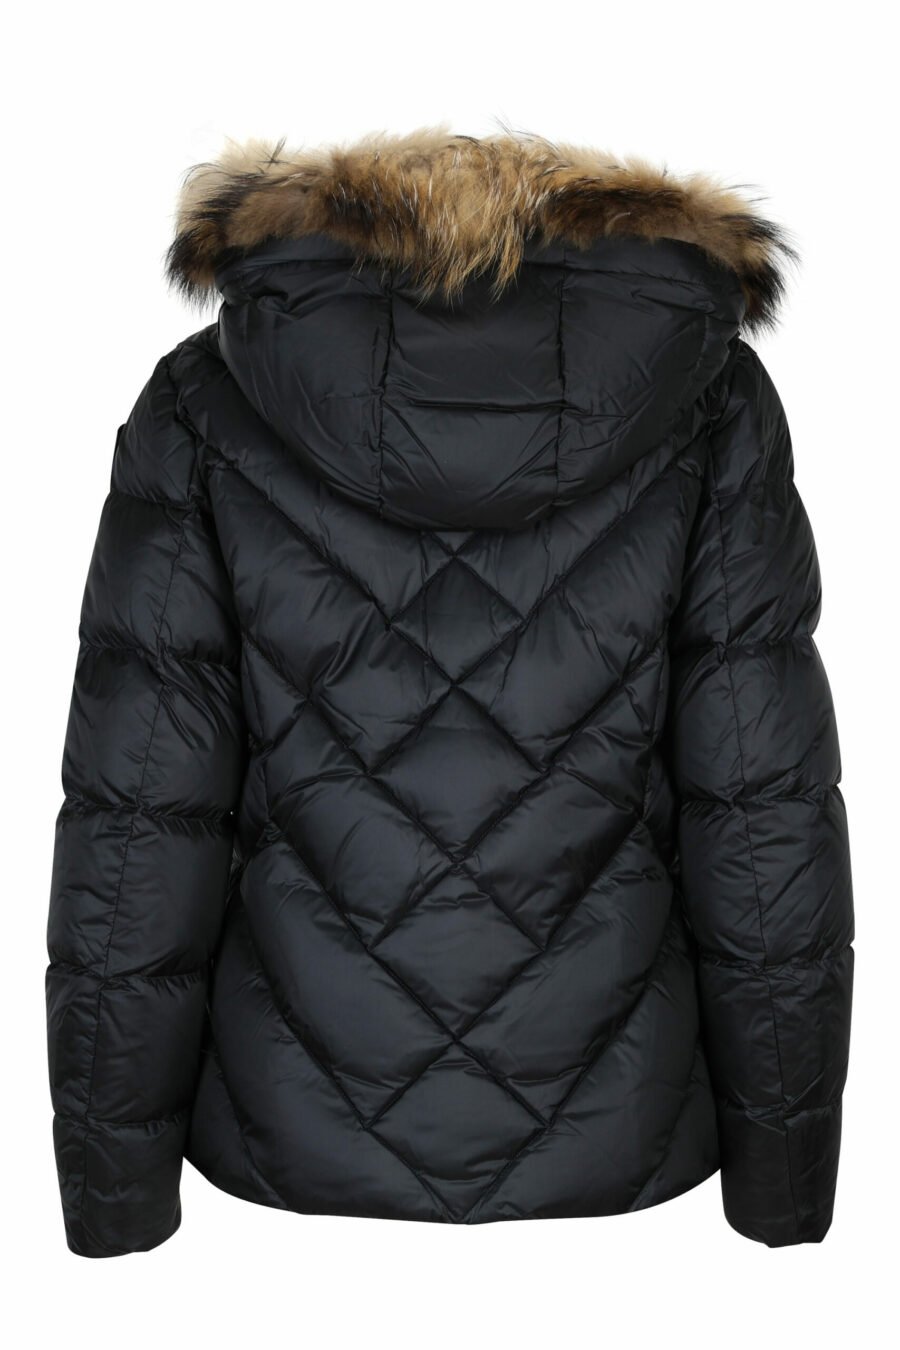 Black hooded fur hooded jacket with diagonal lines and beige lining - 8058610647070 2 scaled